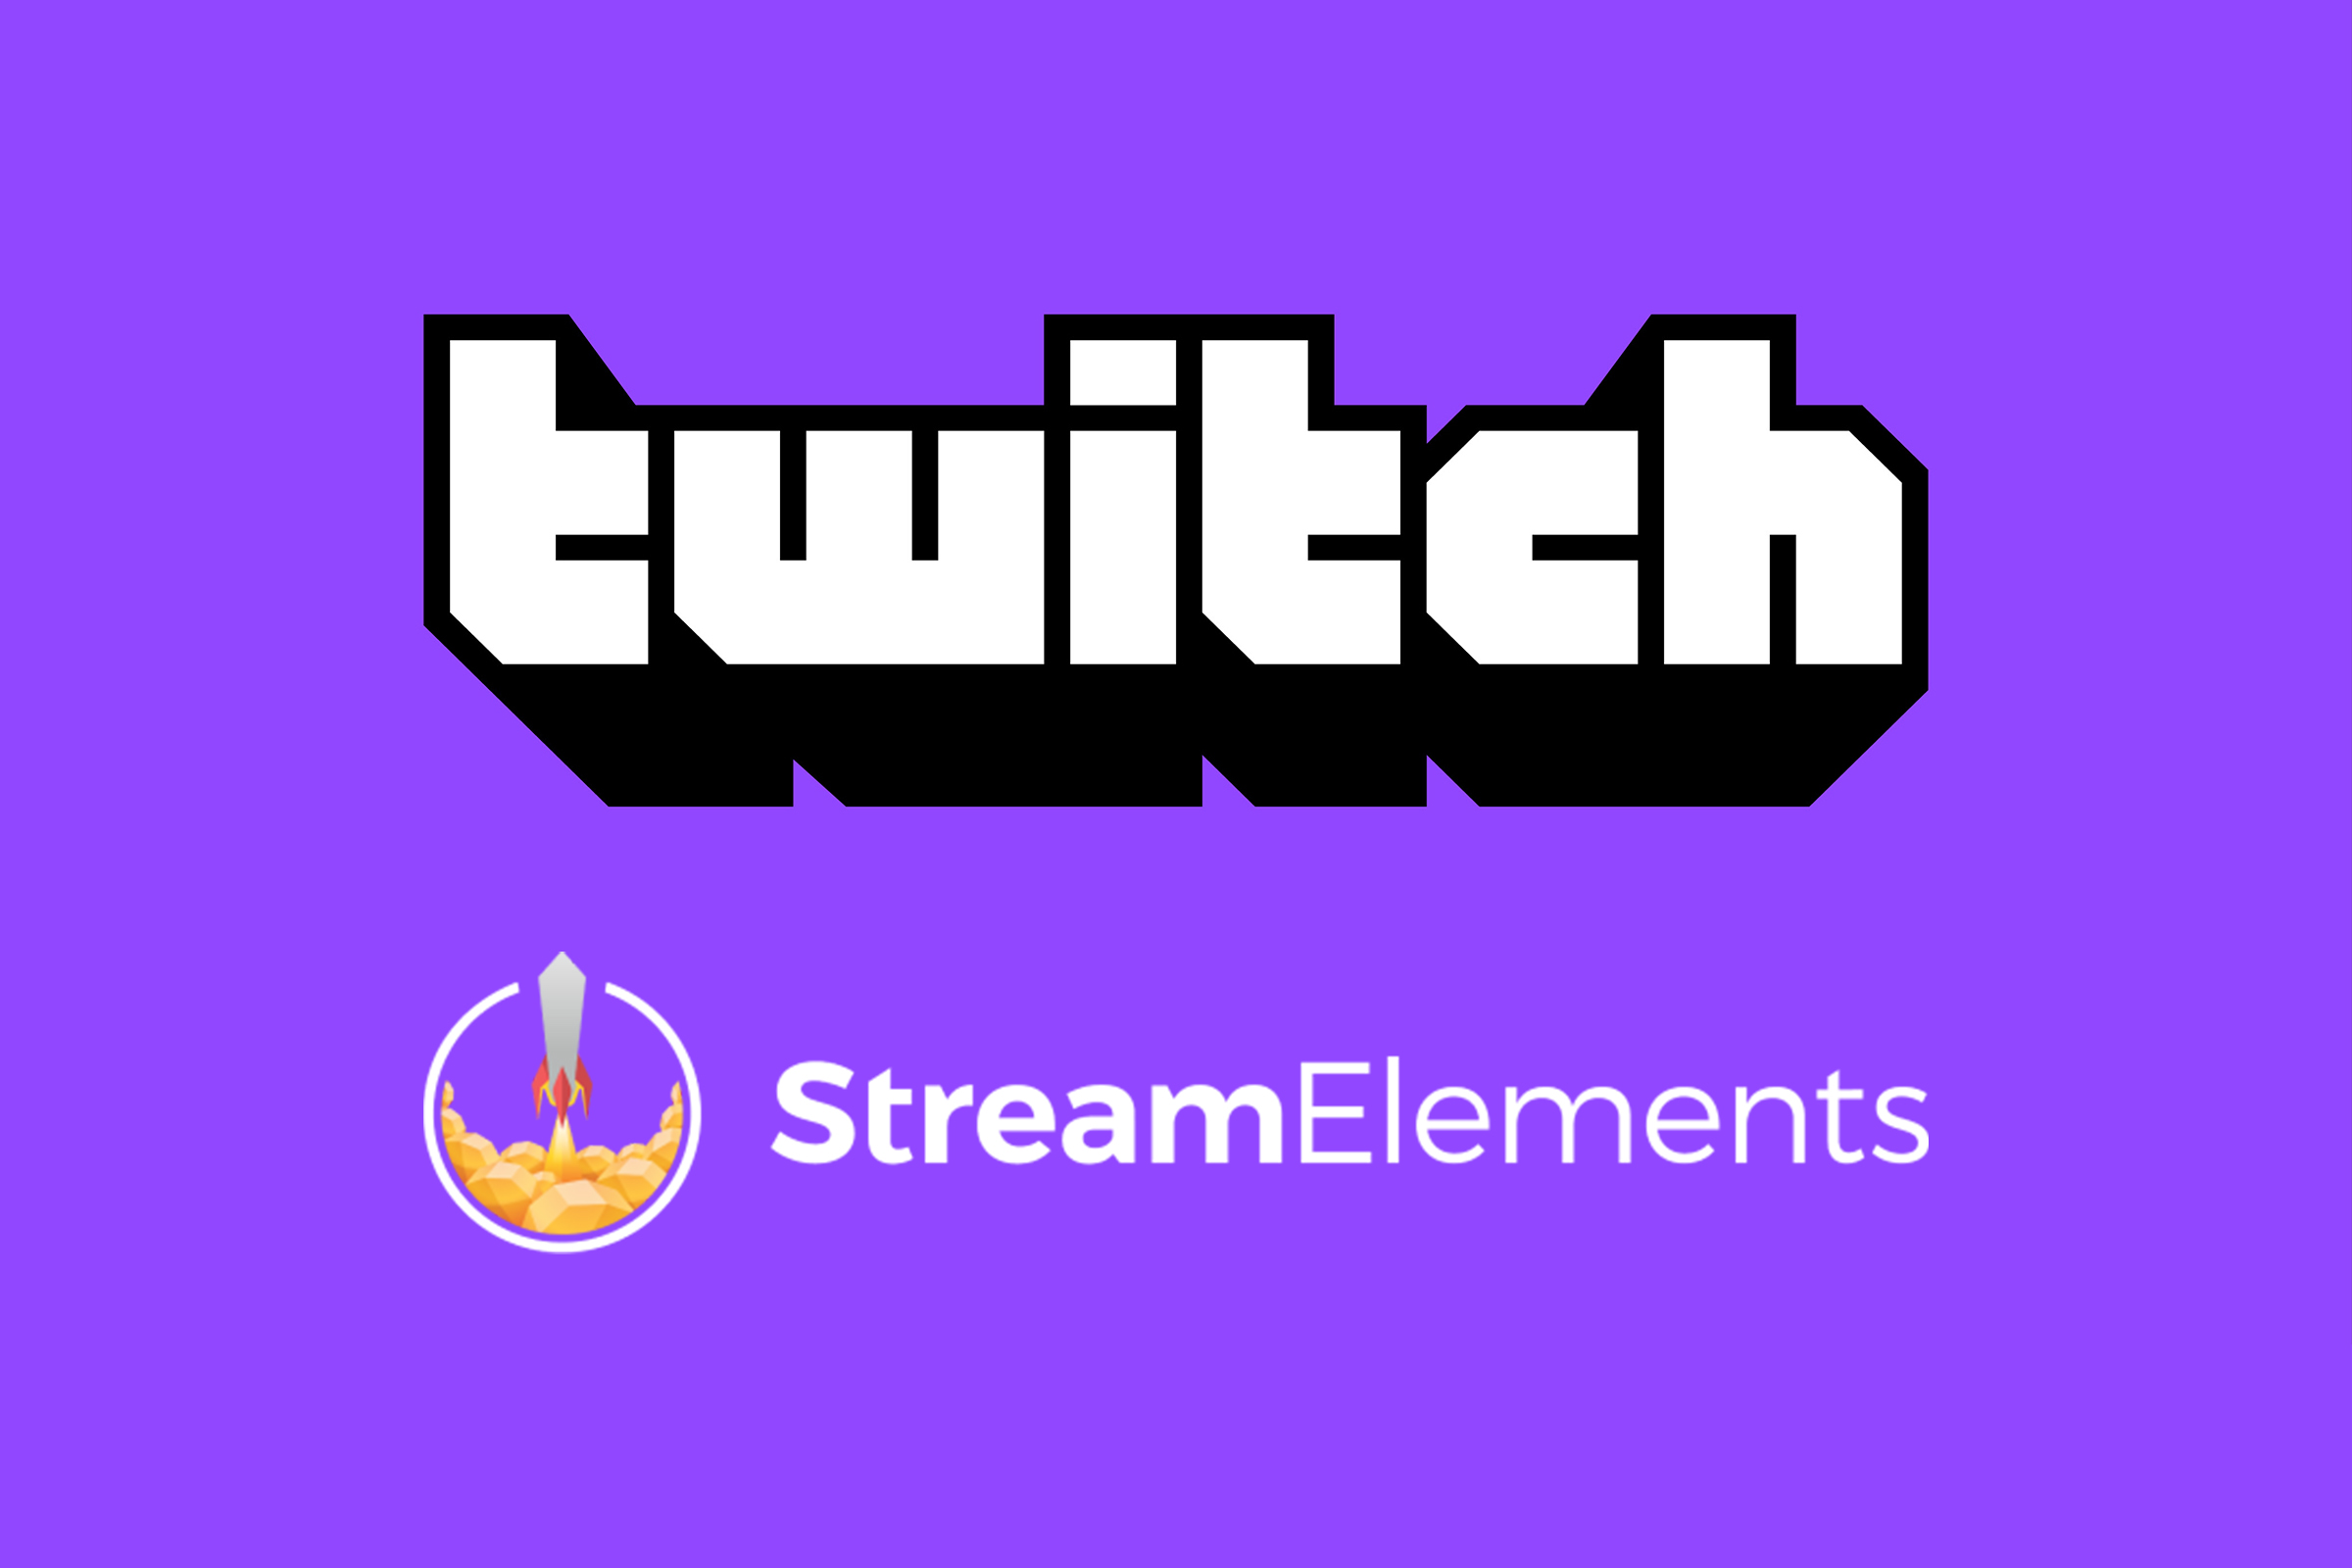 StreamElements reveal the most streamed music channels on Twitch in July